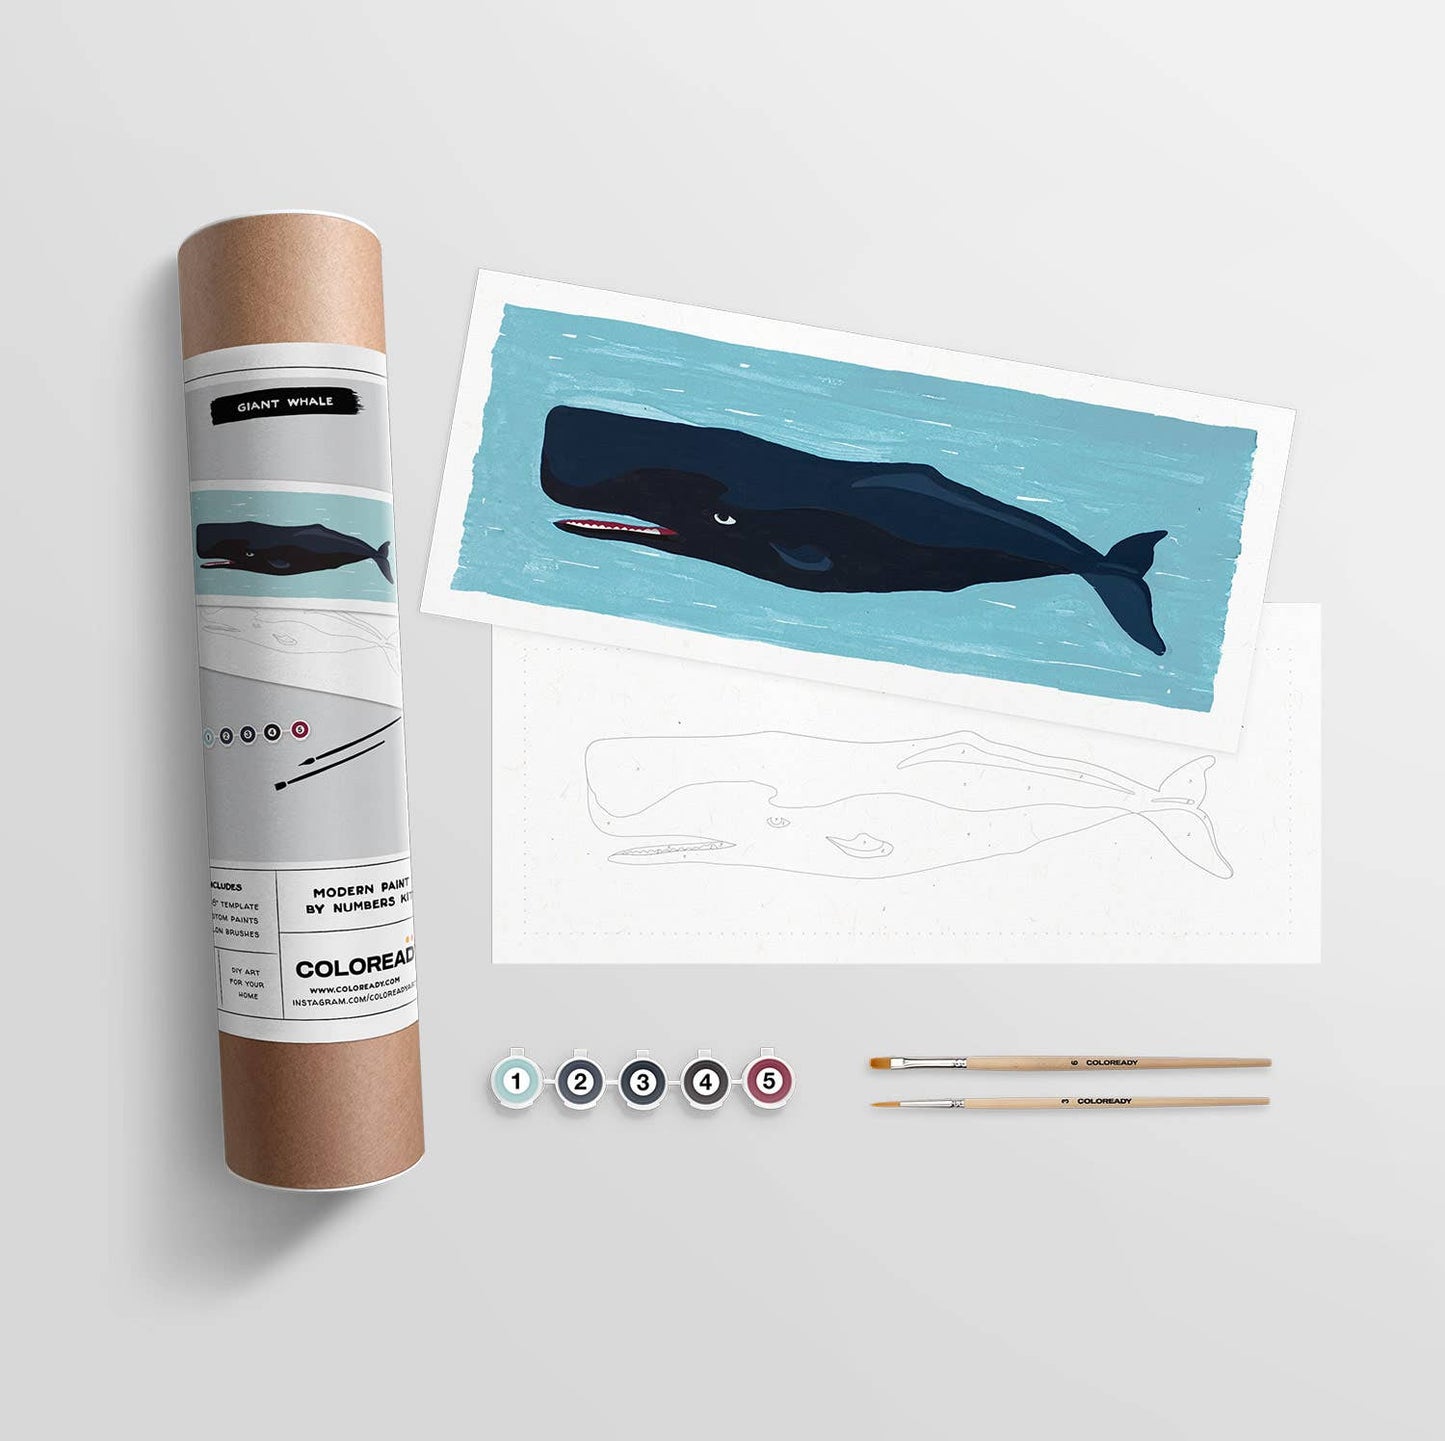 Giant Whale | Modern Paint By Numbers Kit